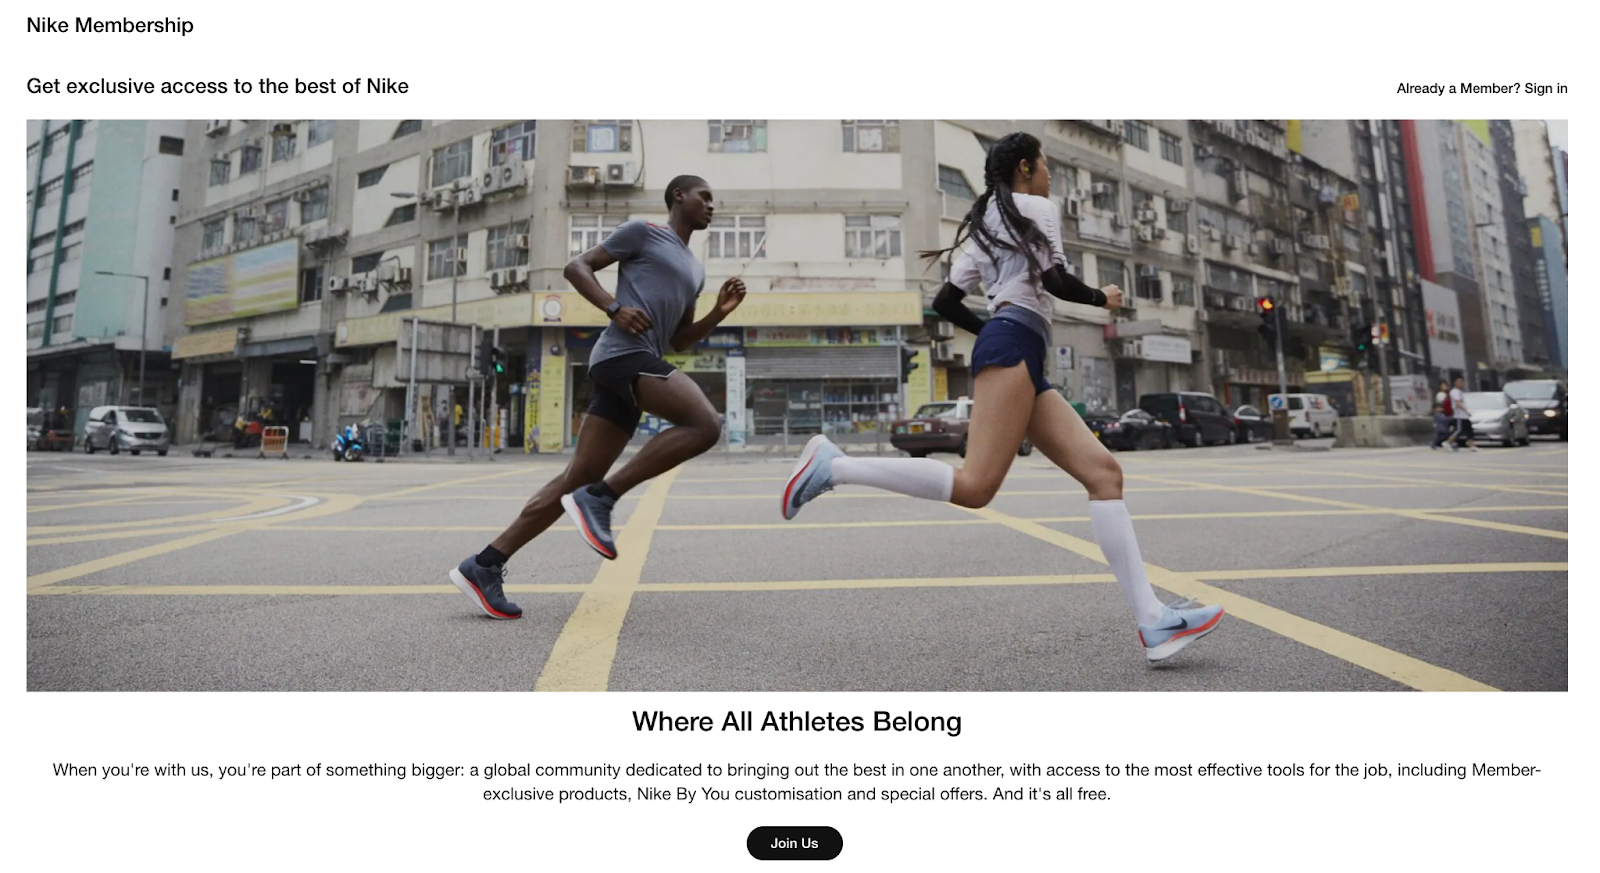 A screenshot of the Nike Membership explainer page with 2 people running in a street and text "Where All Athletes Belong."